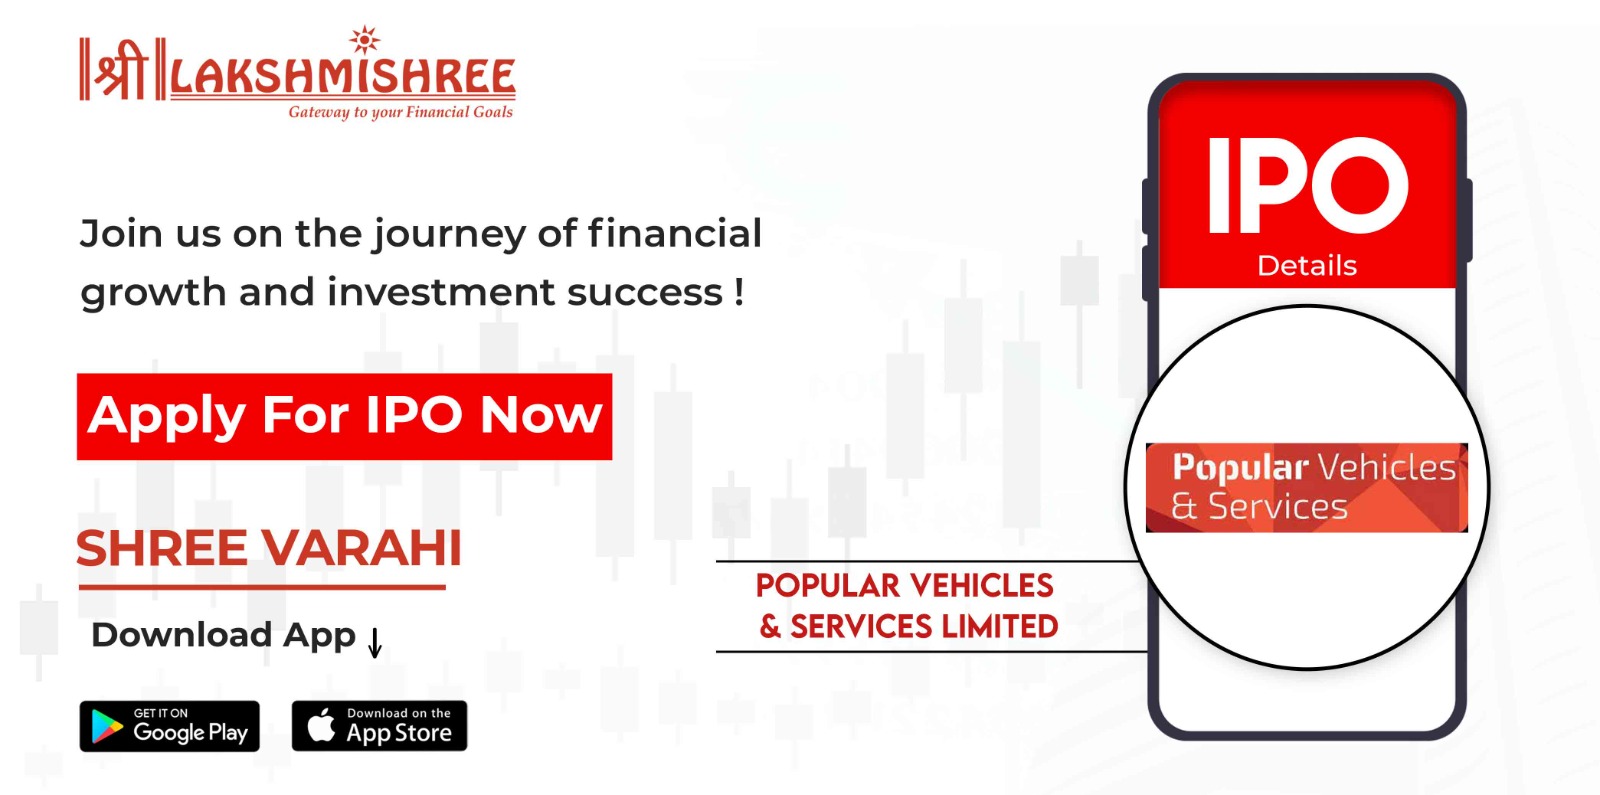 Popular Vehicles & Services IPO Details - Complete Overview of Popular Vehicles & Services Limited IPO